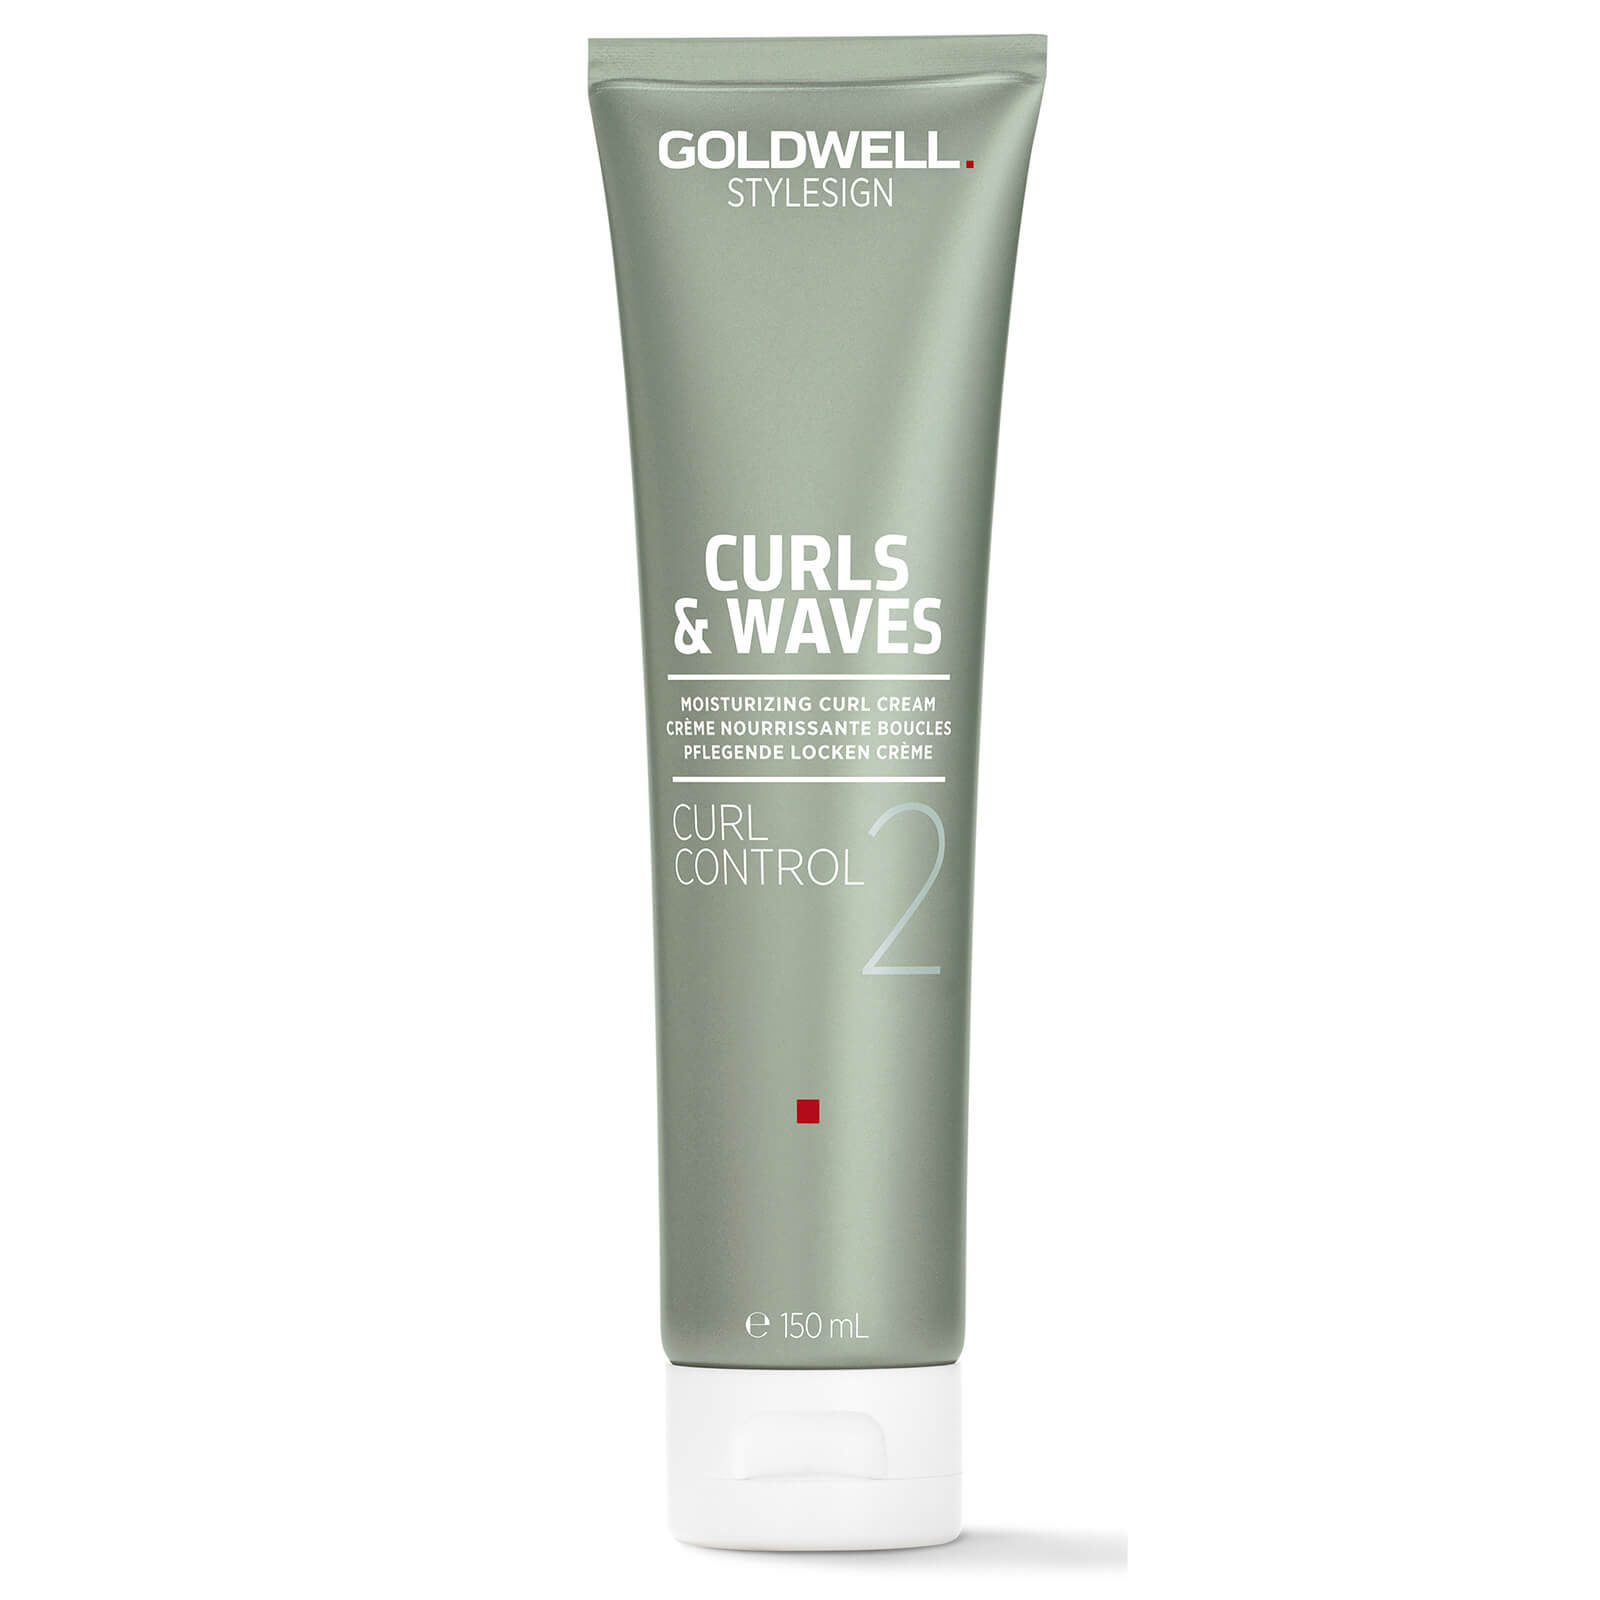 Goldwell StyleSIgn Curls and Waves Curl Control 150ml